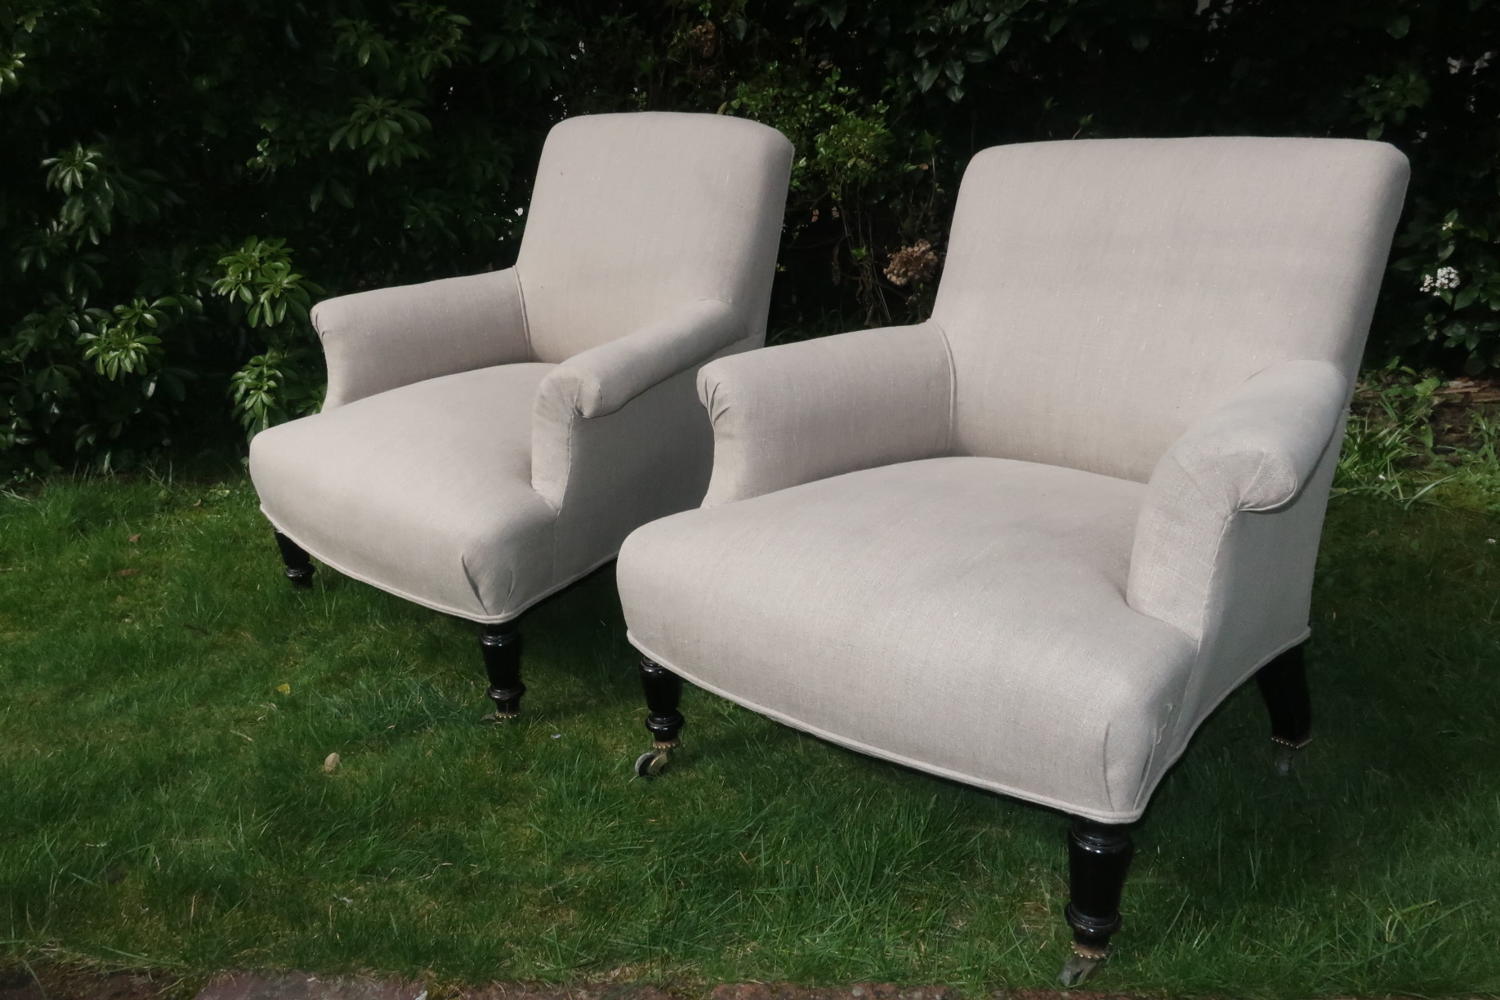 Pair of French armchairs in grey linen